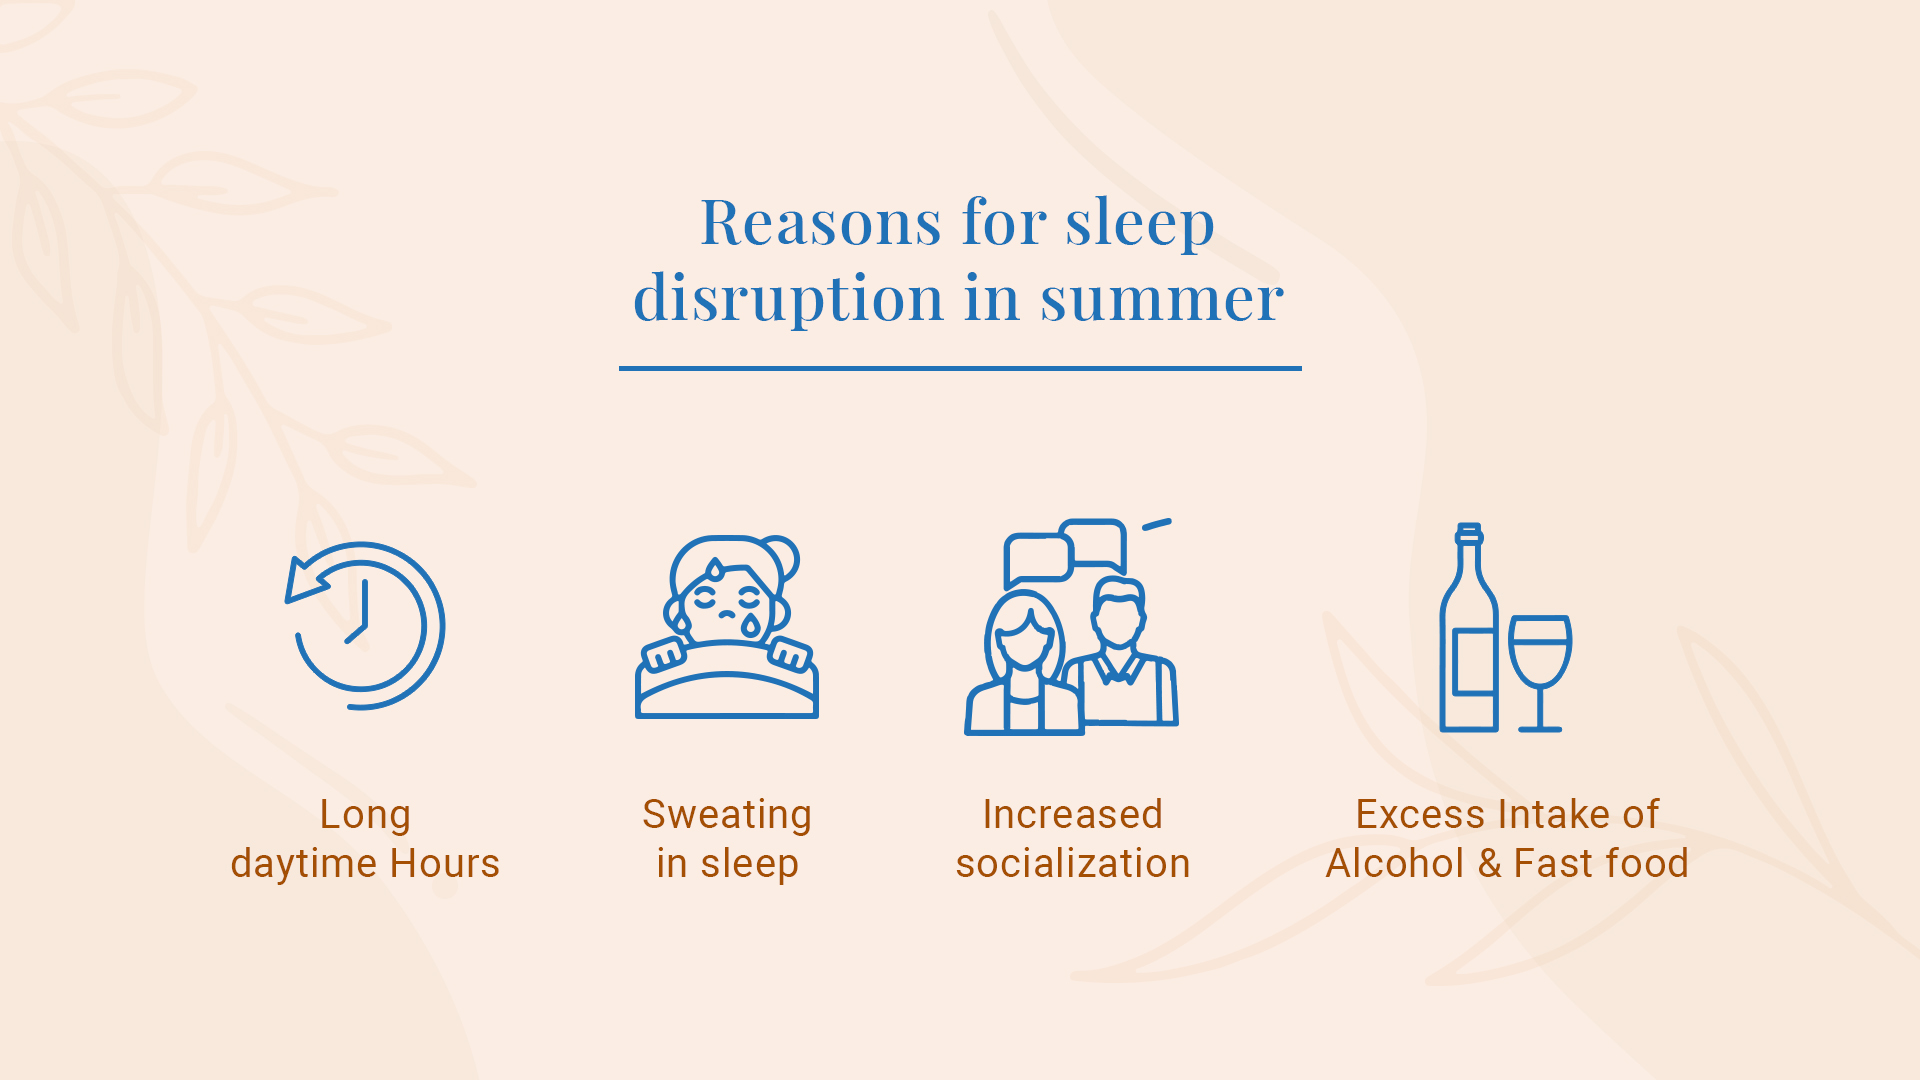 Reasons for disruptions in summer